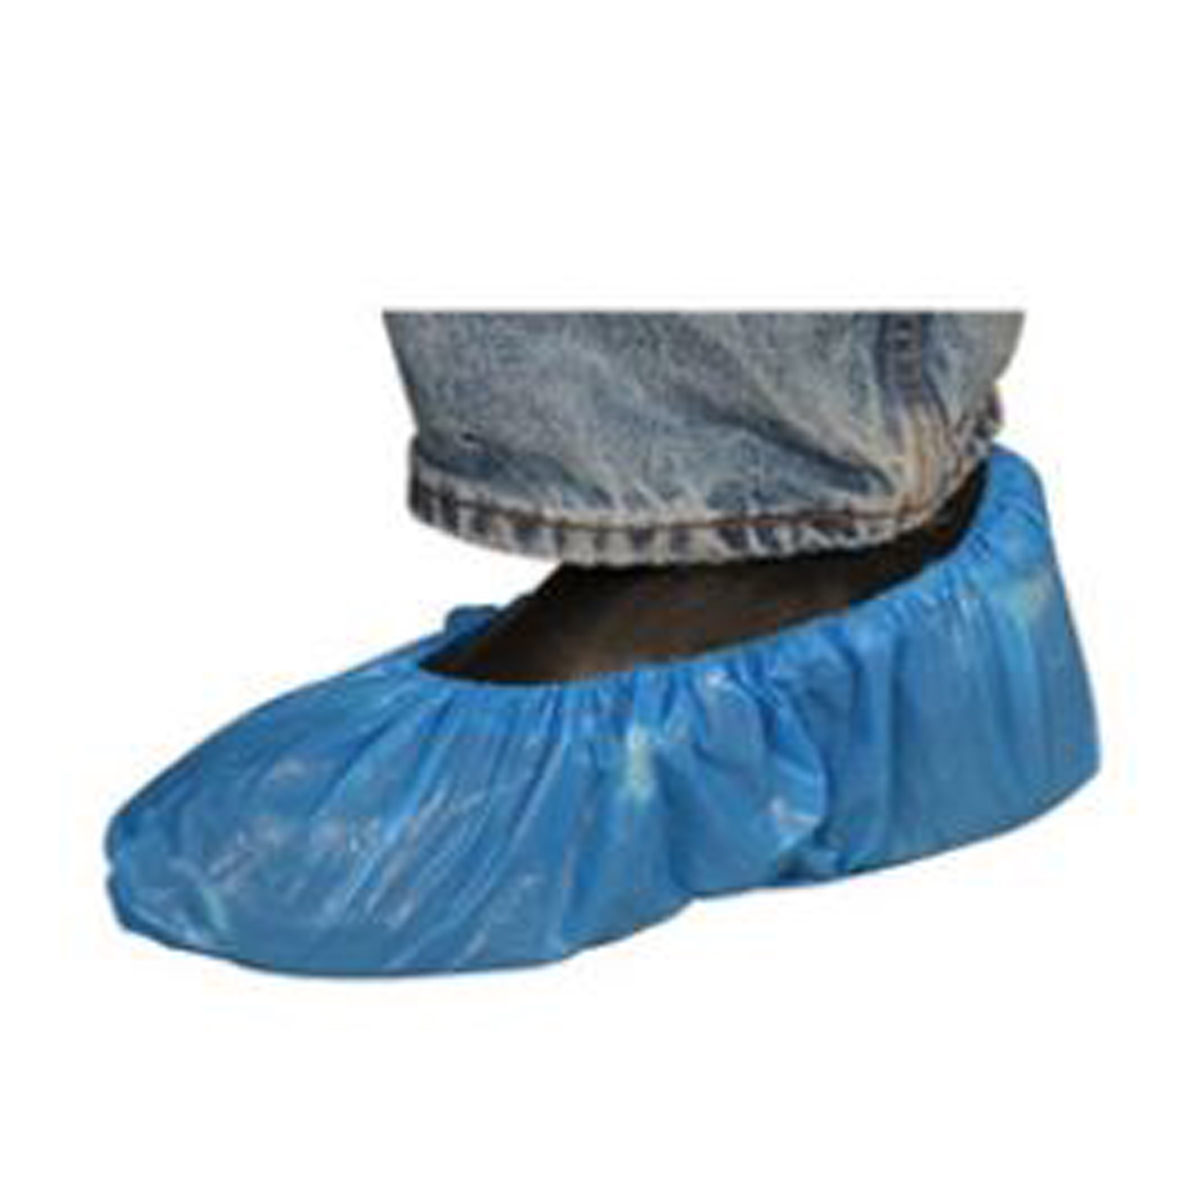 100 Pieces Radnor X-Large Blue Polyethylene Disposable Shoe Covers RAD64055335 